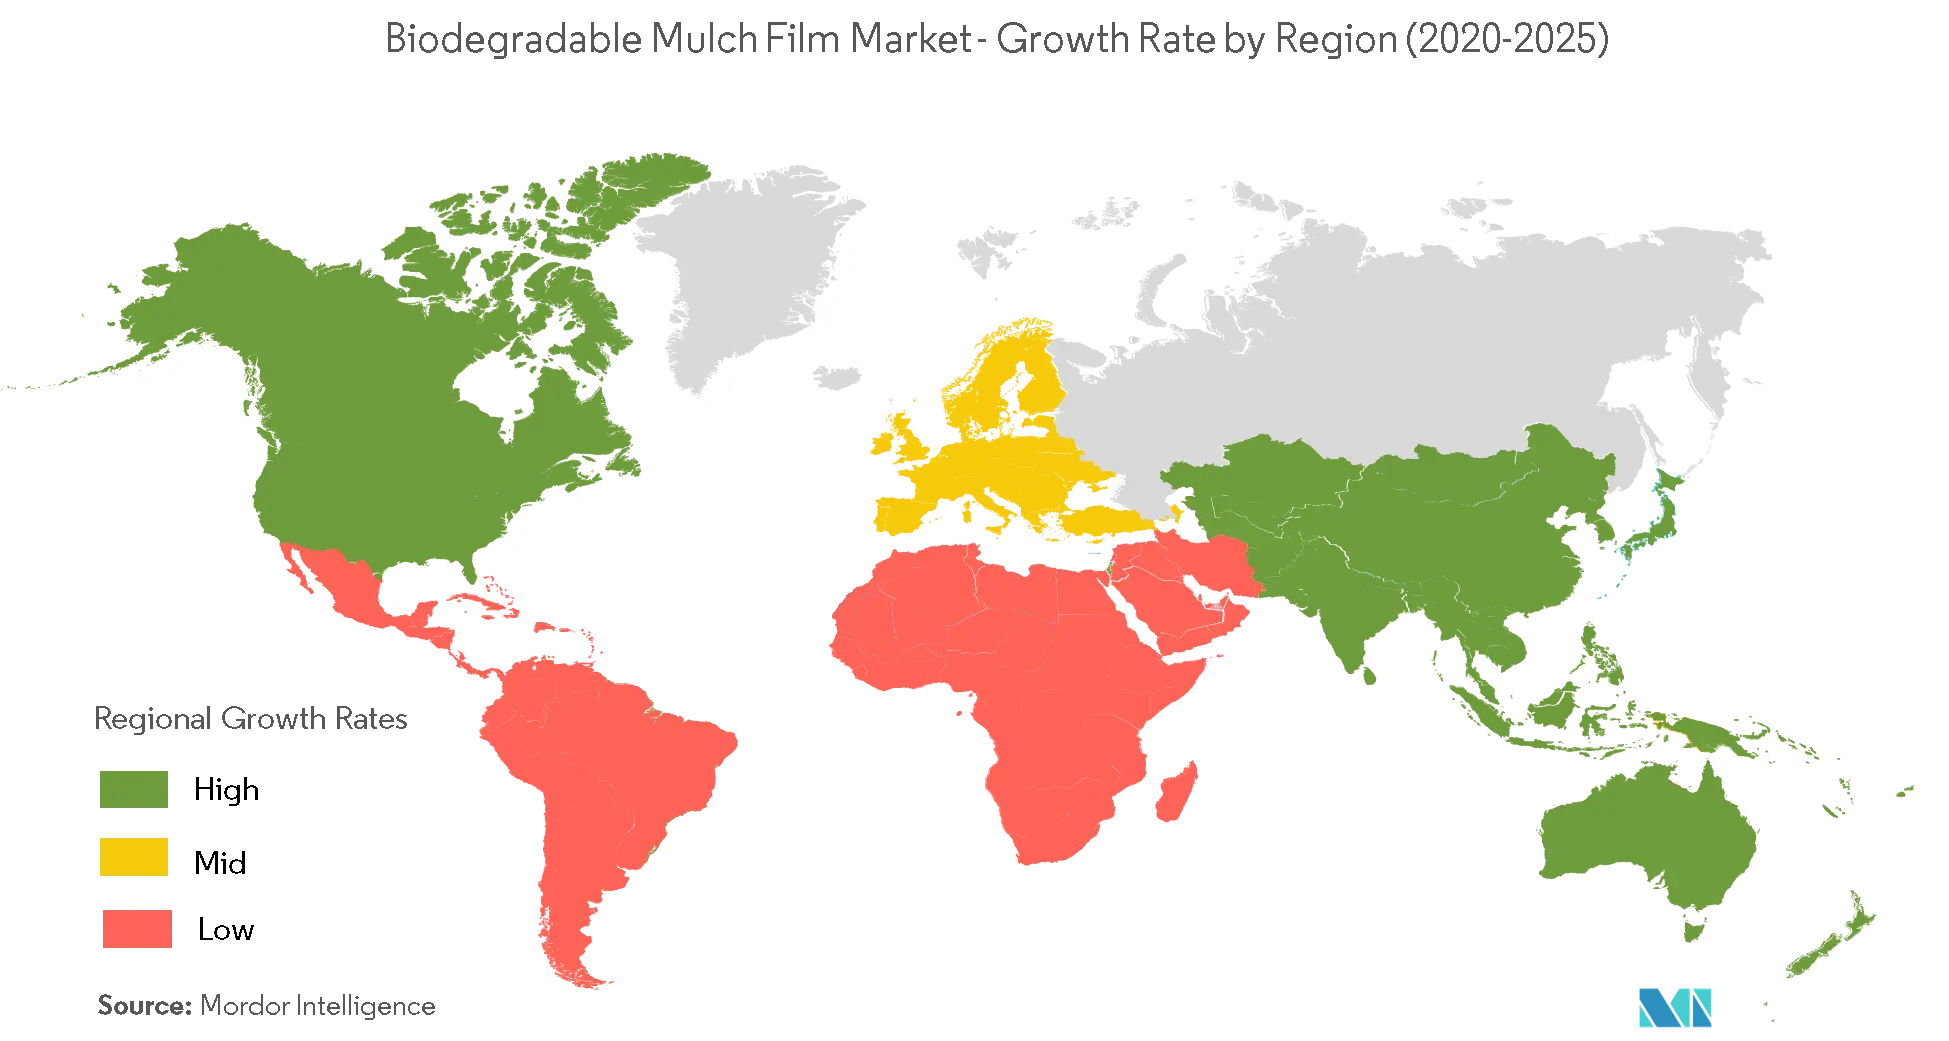 Biodegradable Mulch Films Market: Growth Rate by Region (2020-2025)